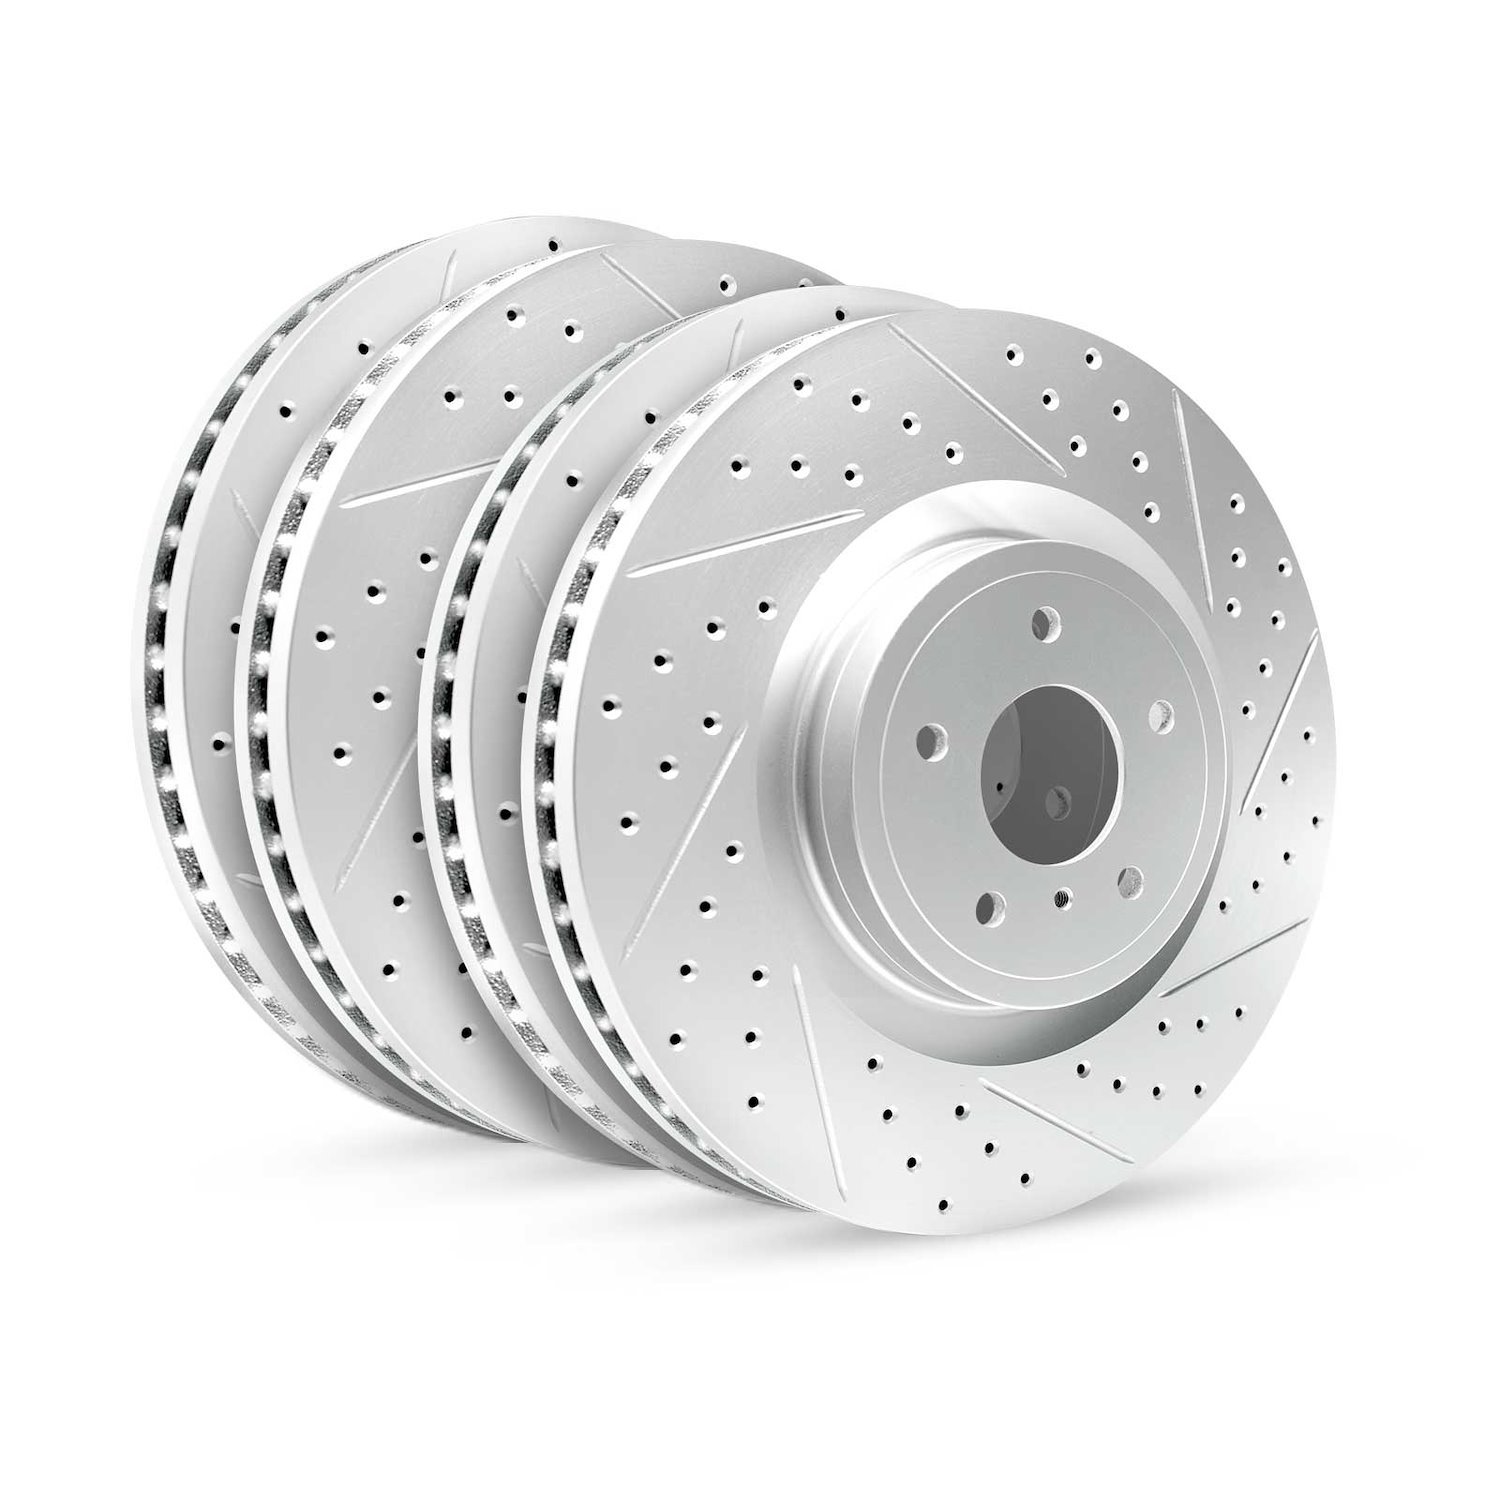 GEO-Carbon Drilled/Slotted Rotors, 1999-2015 Ford/Mazda, Position: Front/Rear